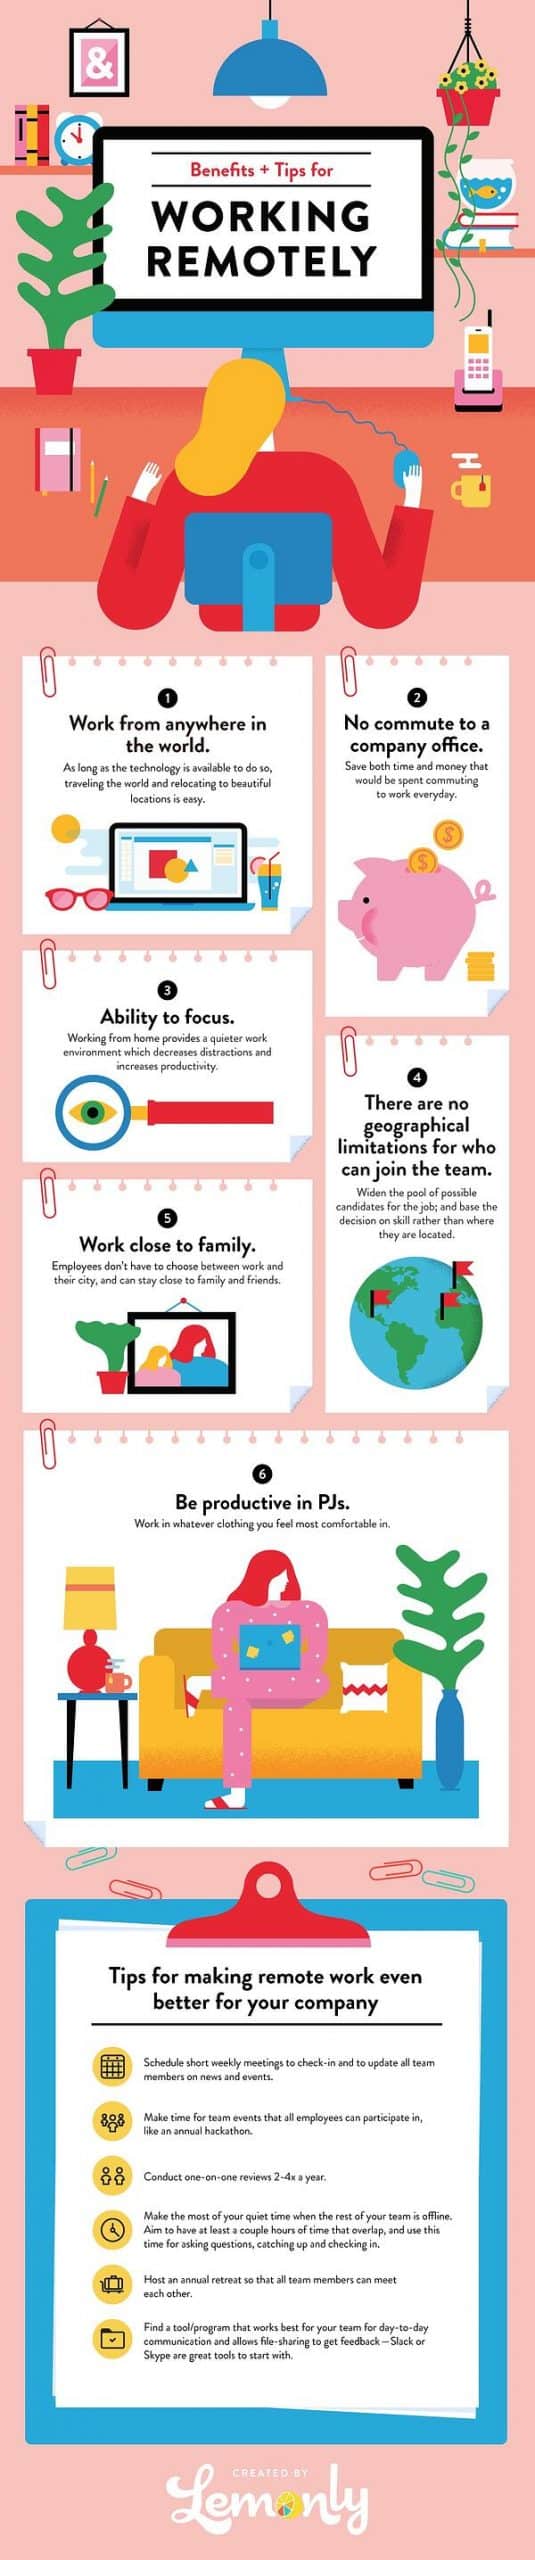 Tips-and-Tricks-for-working-from-home-remote-work-infographic-lemonly